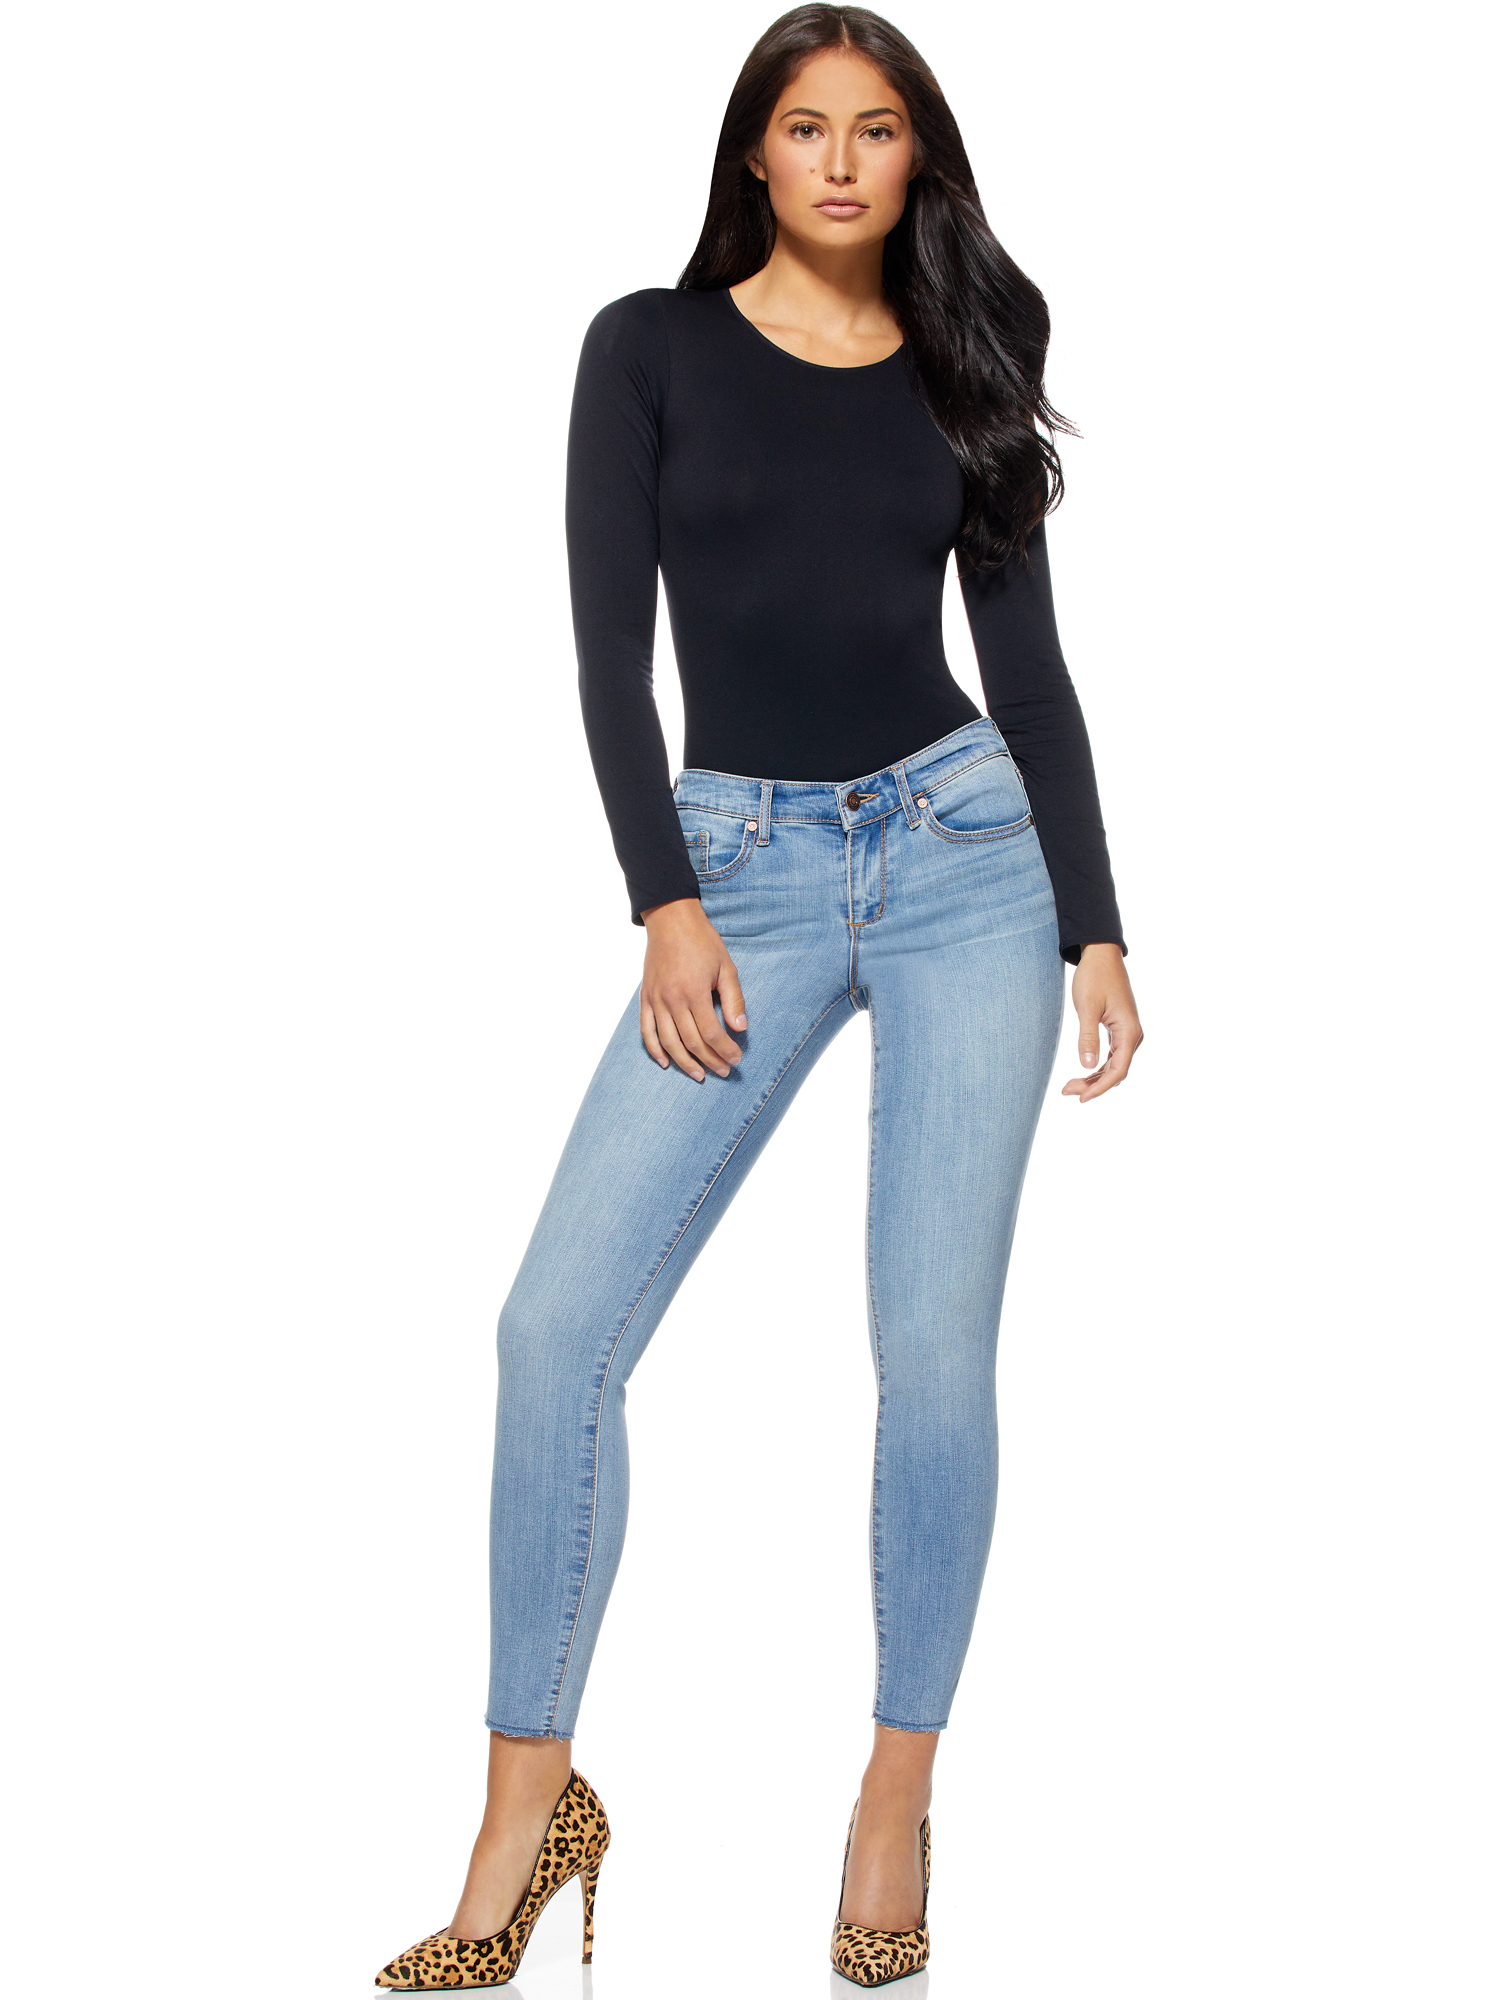 Sofia Jeans Women's Sofia Skinny Mid Rise Ankle Jeans - image 4 of 7